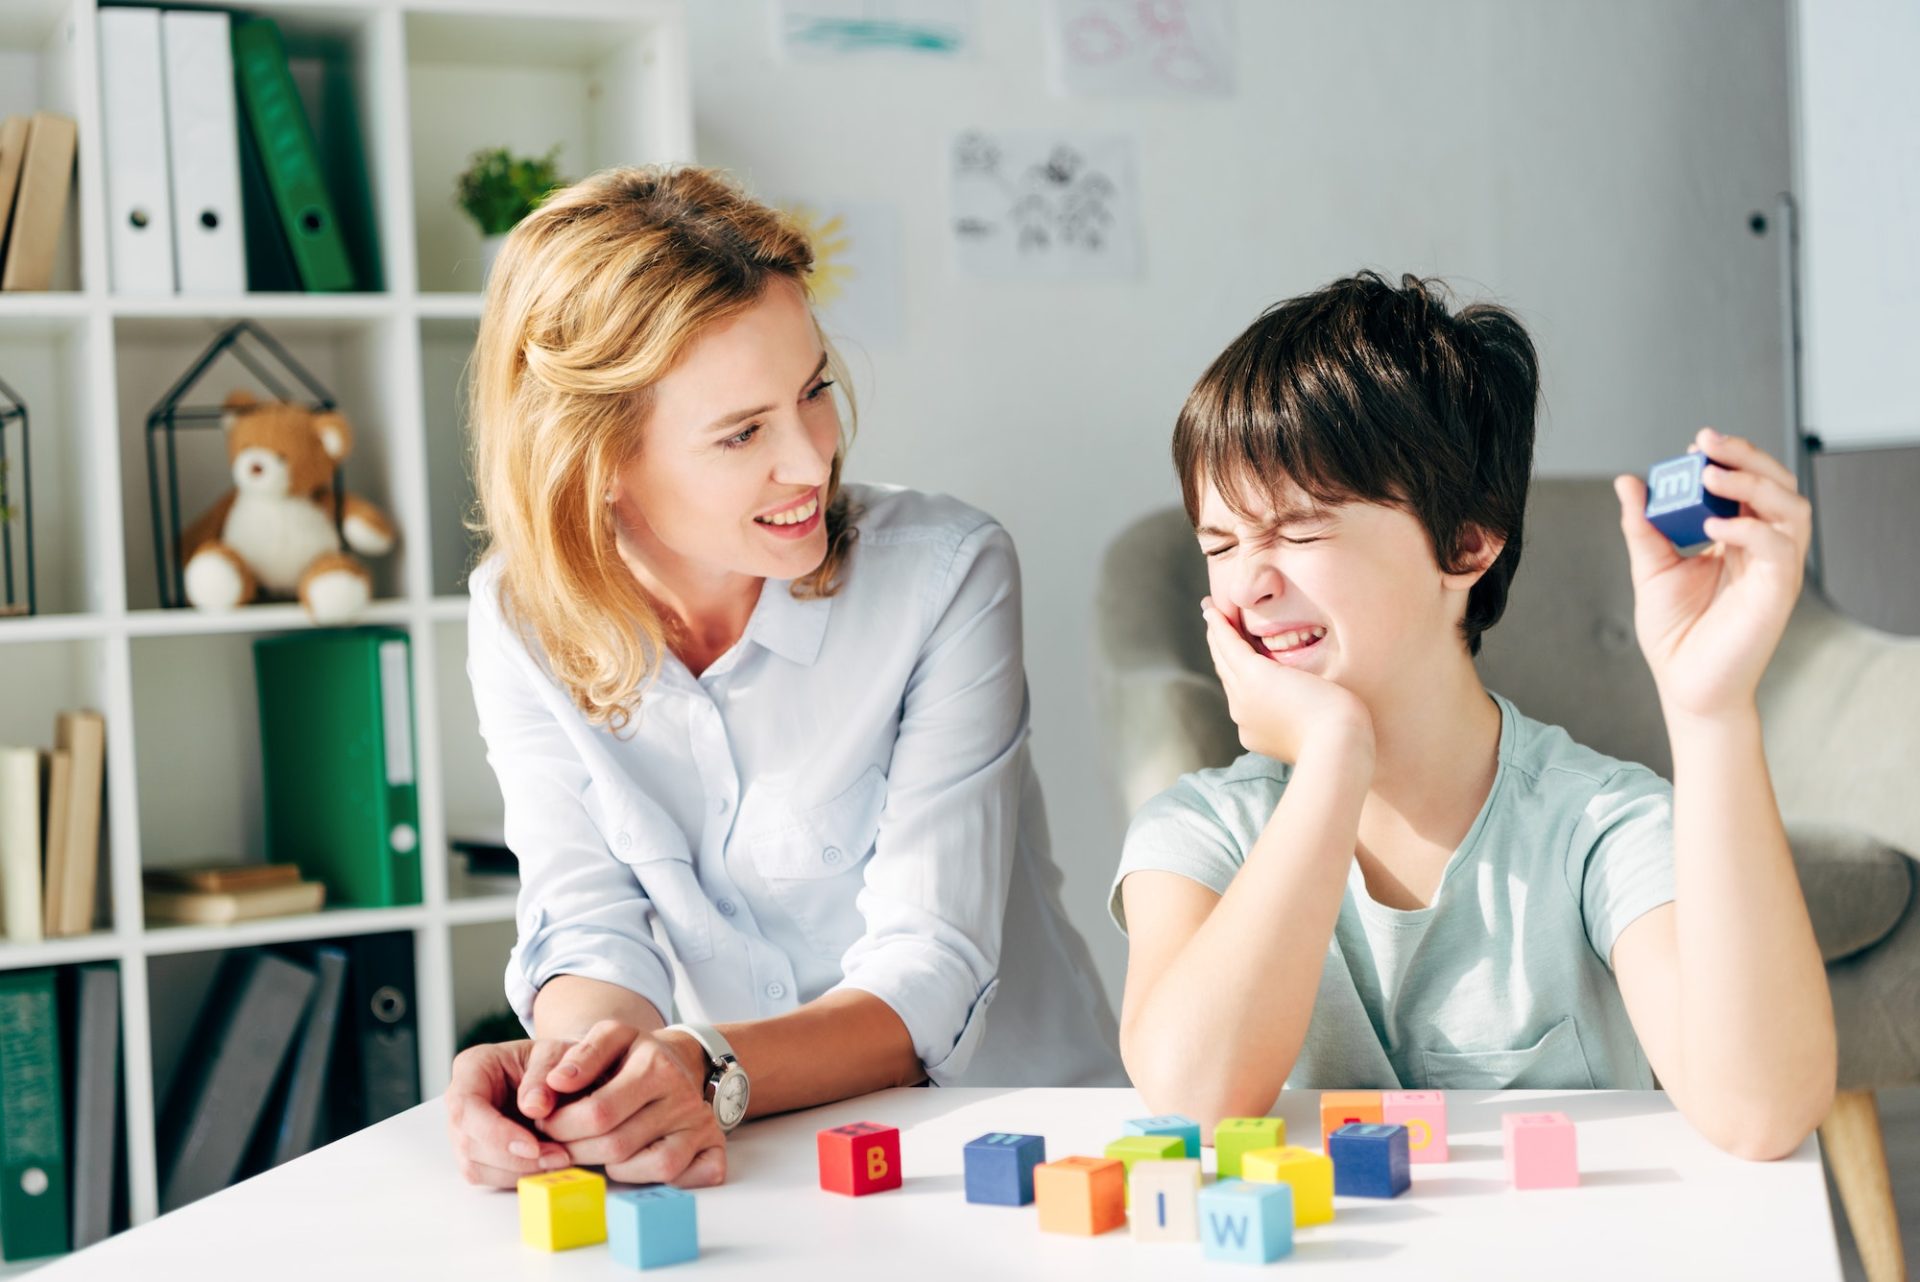 smiling child psychologist and kid with dyslexia playing with building blocks